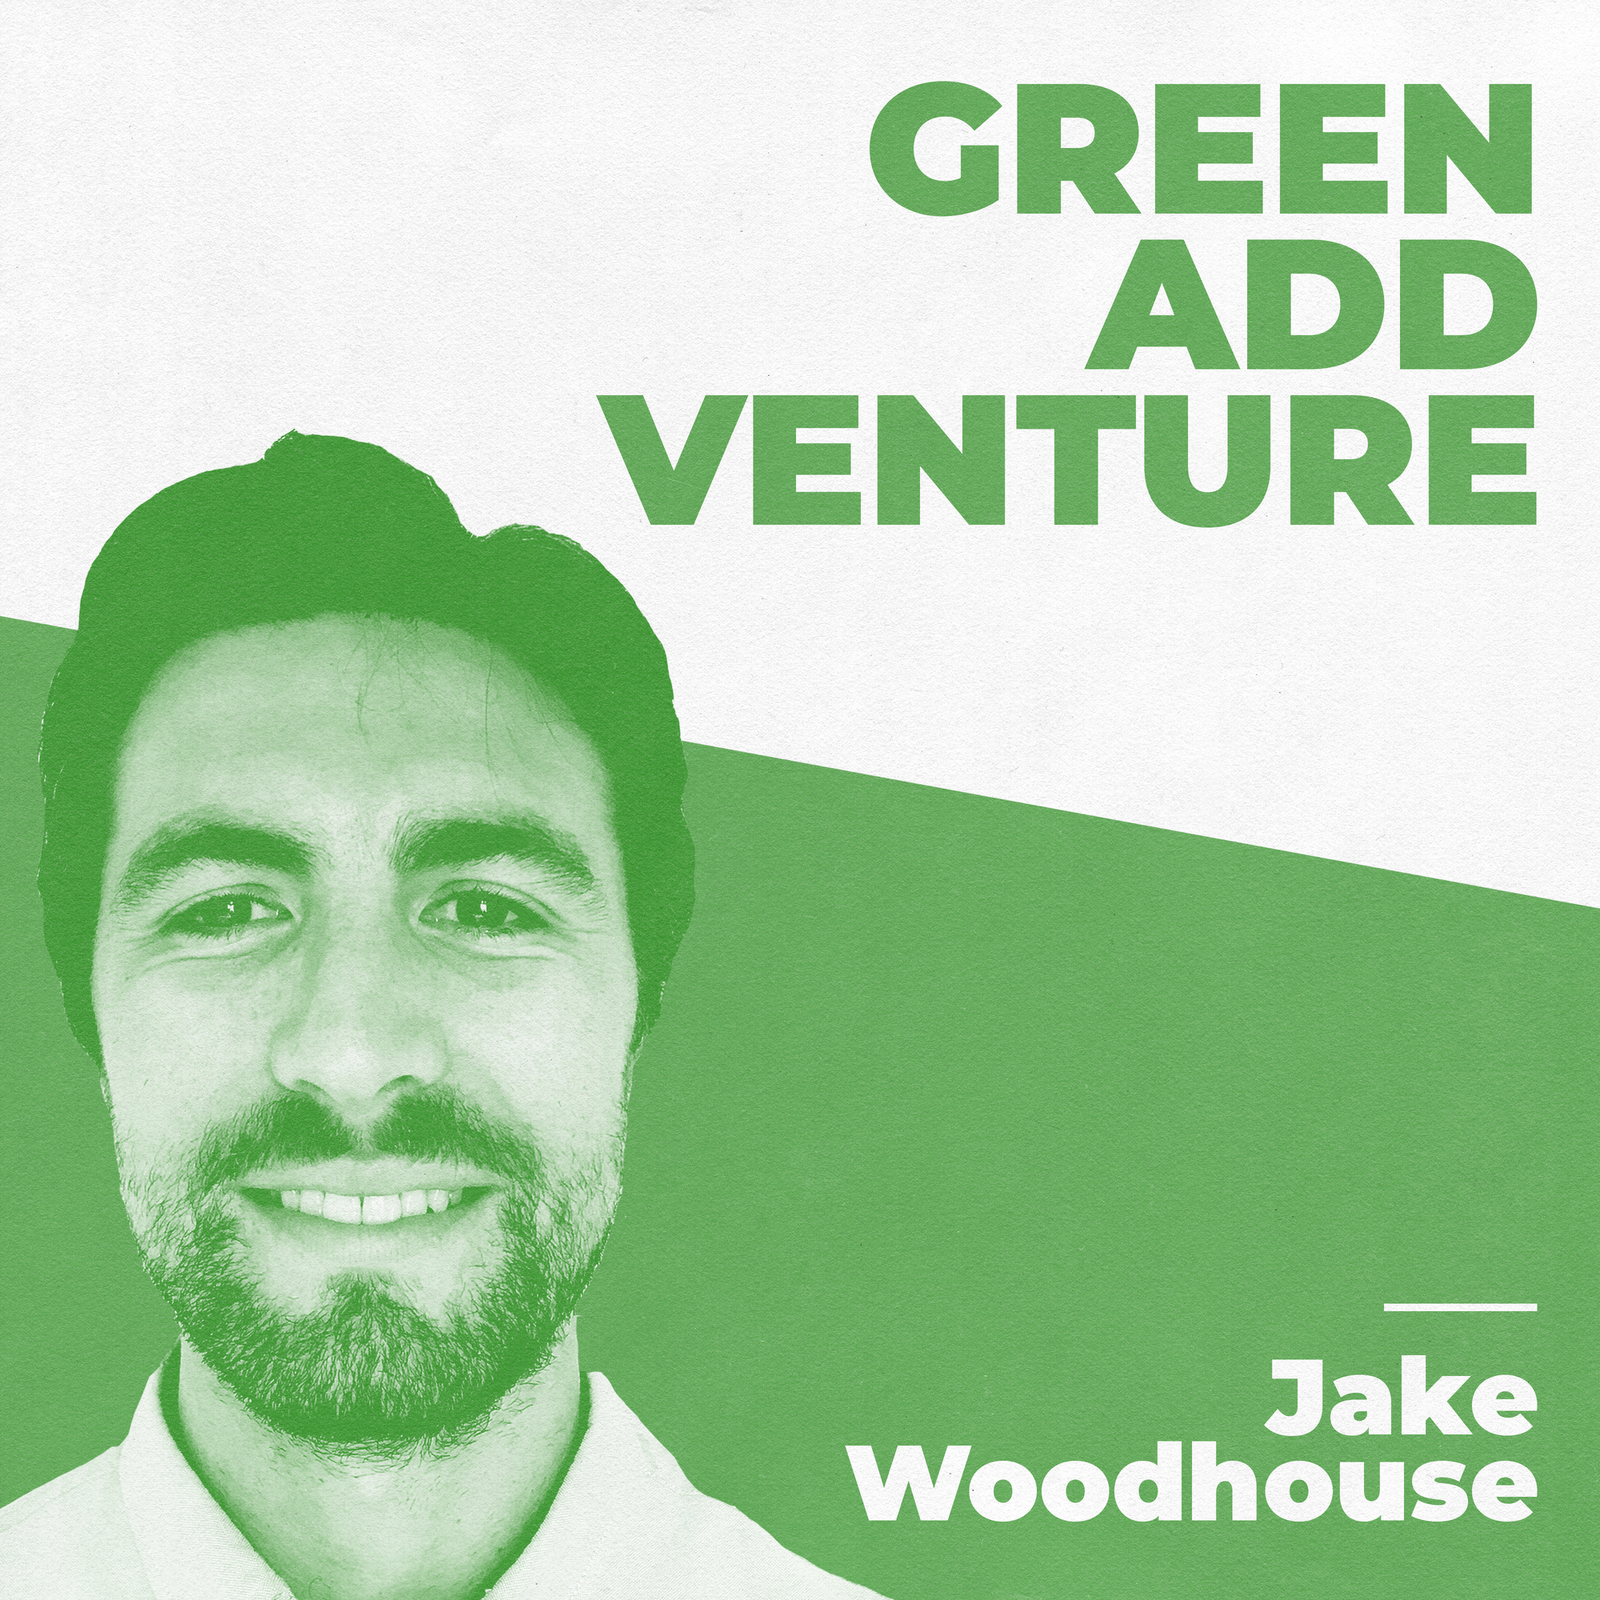 Jake Woodhouse - What is the Green Add Venture Podcast - Trailer